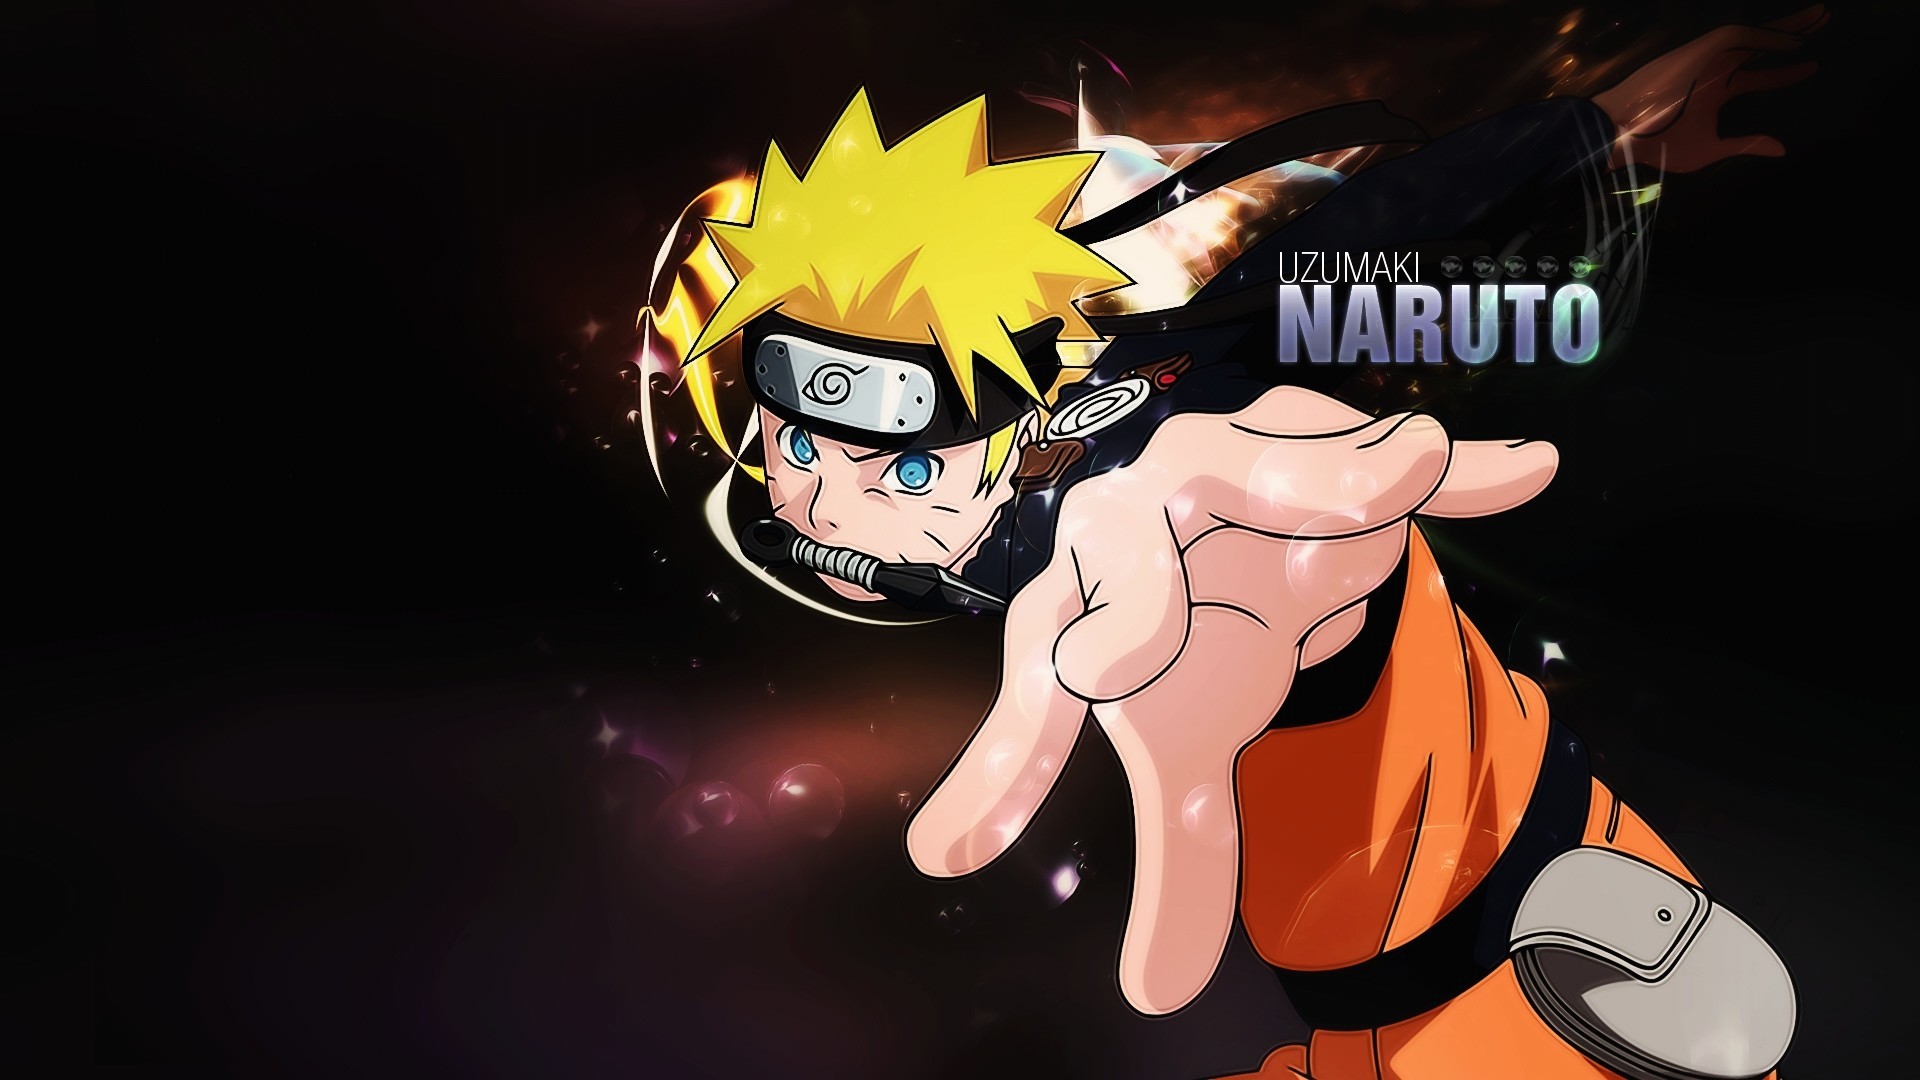 Wallpapers De Naruto Shippuden Hd 2018 57 Pictures